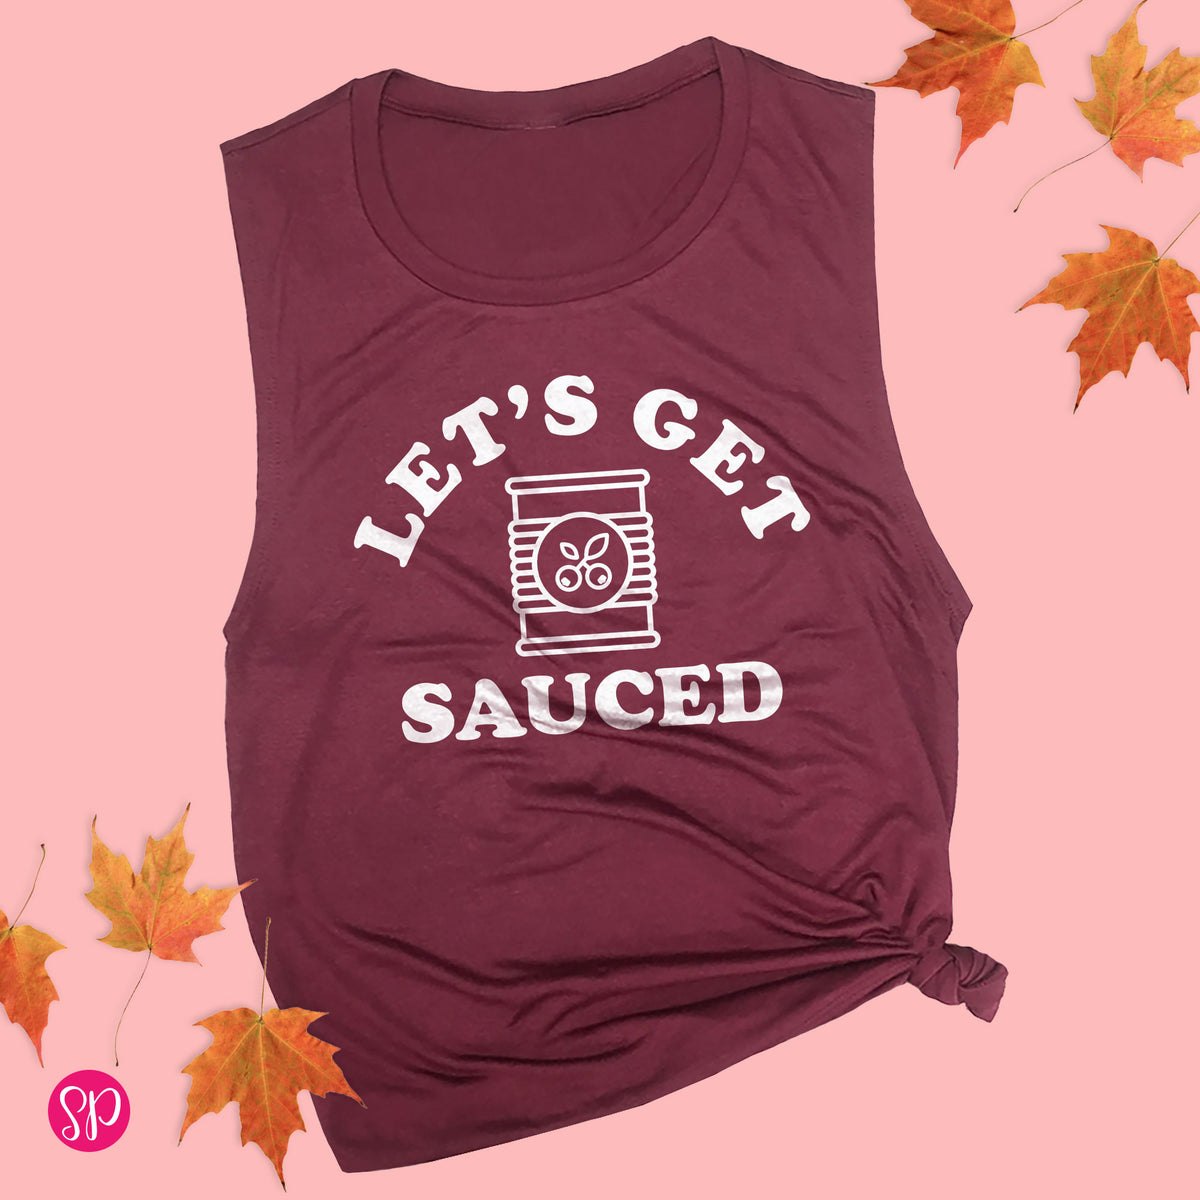 Let's Get Sauced Cranberry Sauce Thanksgiving Workout Drinking Fitness Tank Top Women